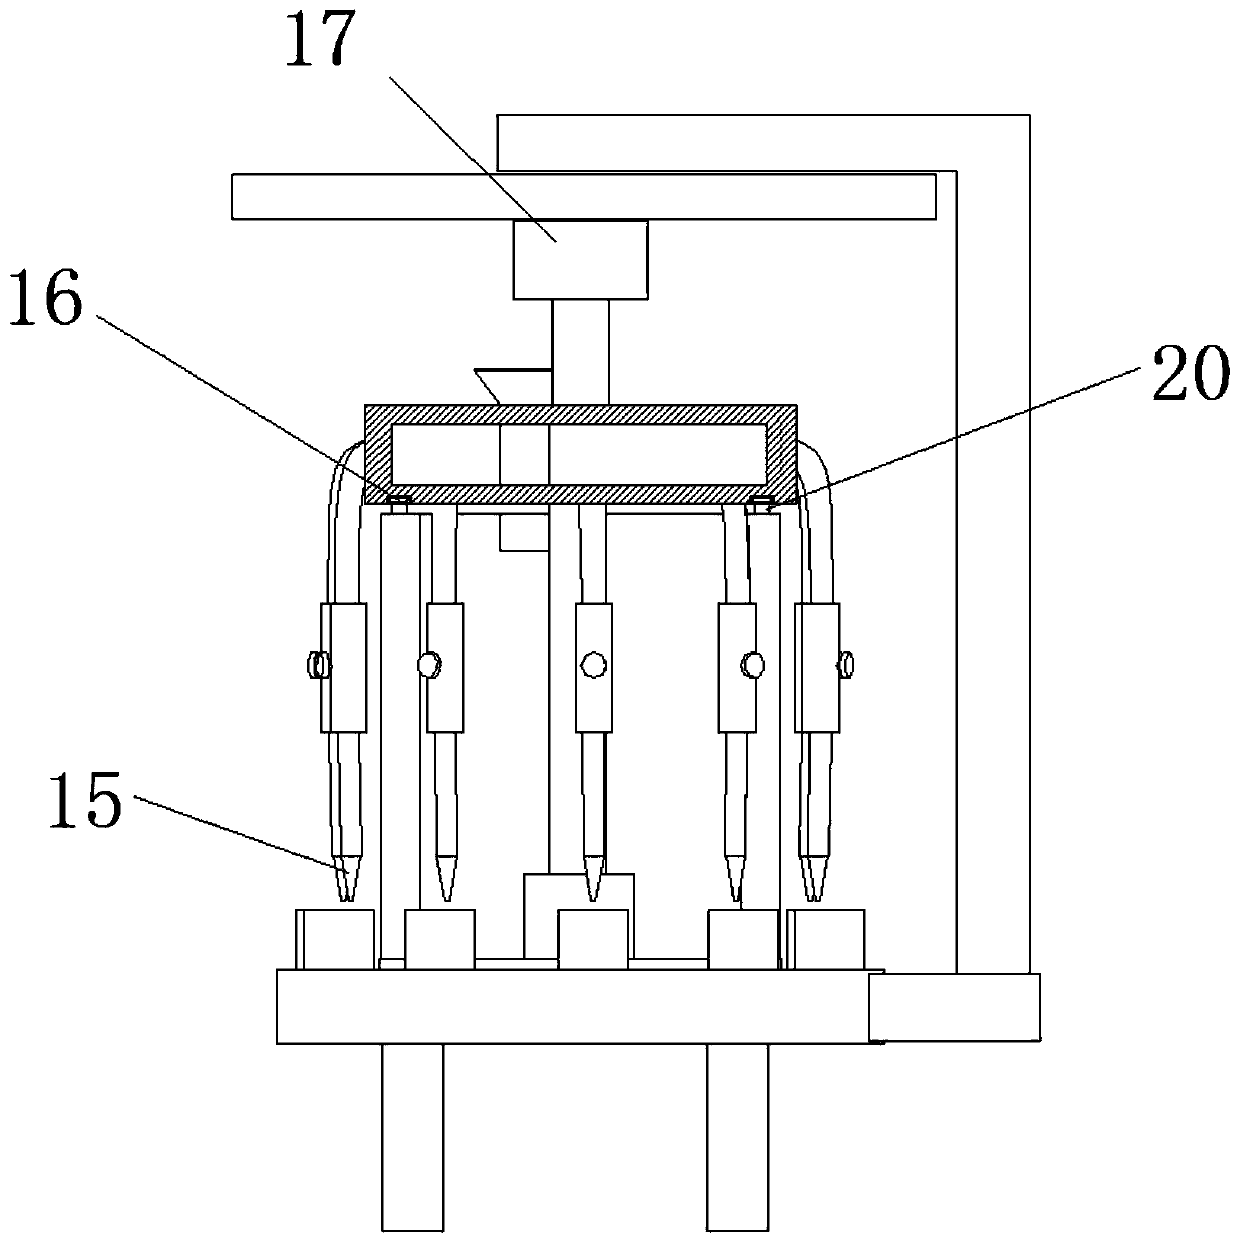 Metering and filling device used in camellia seed oil production process